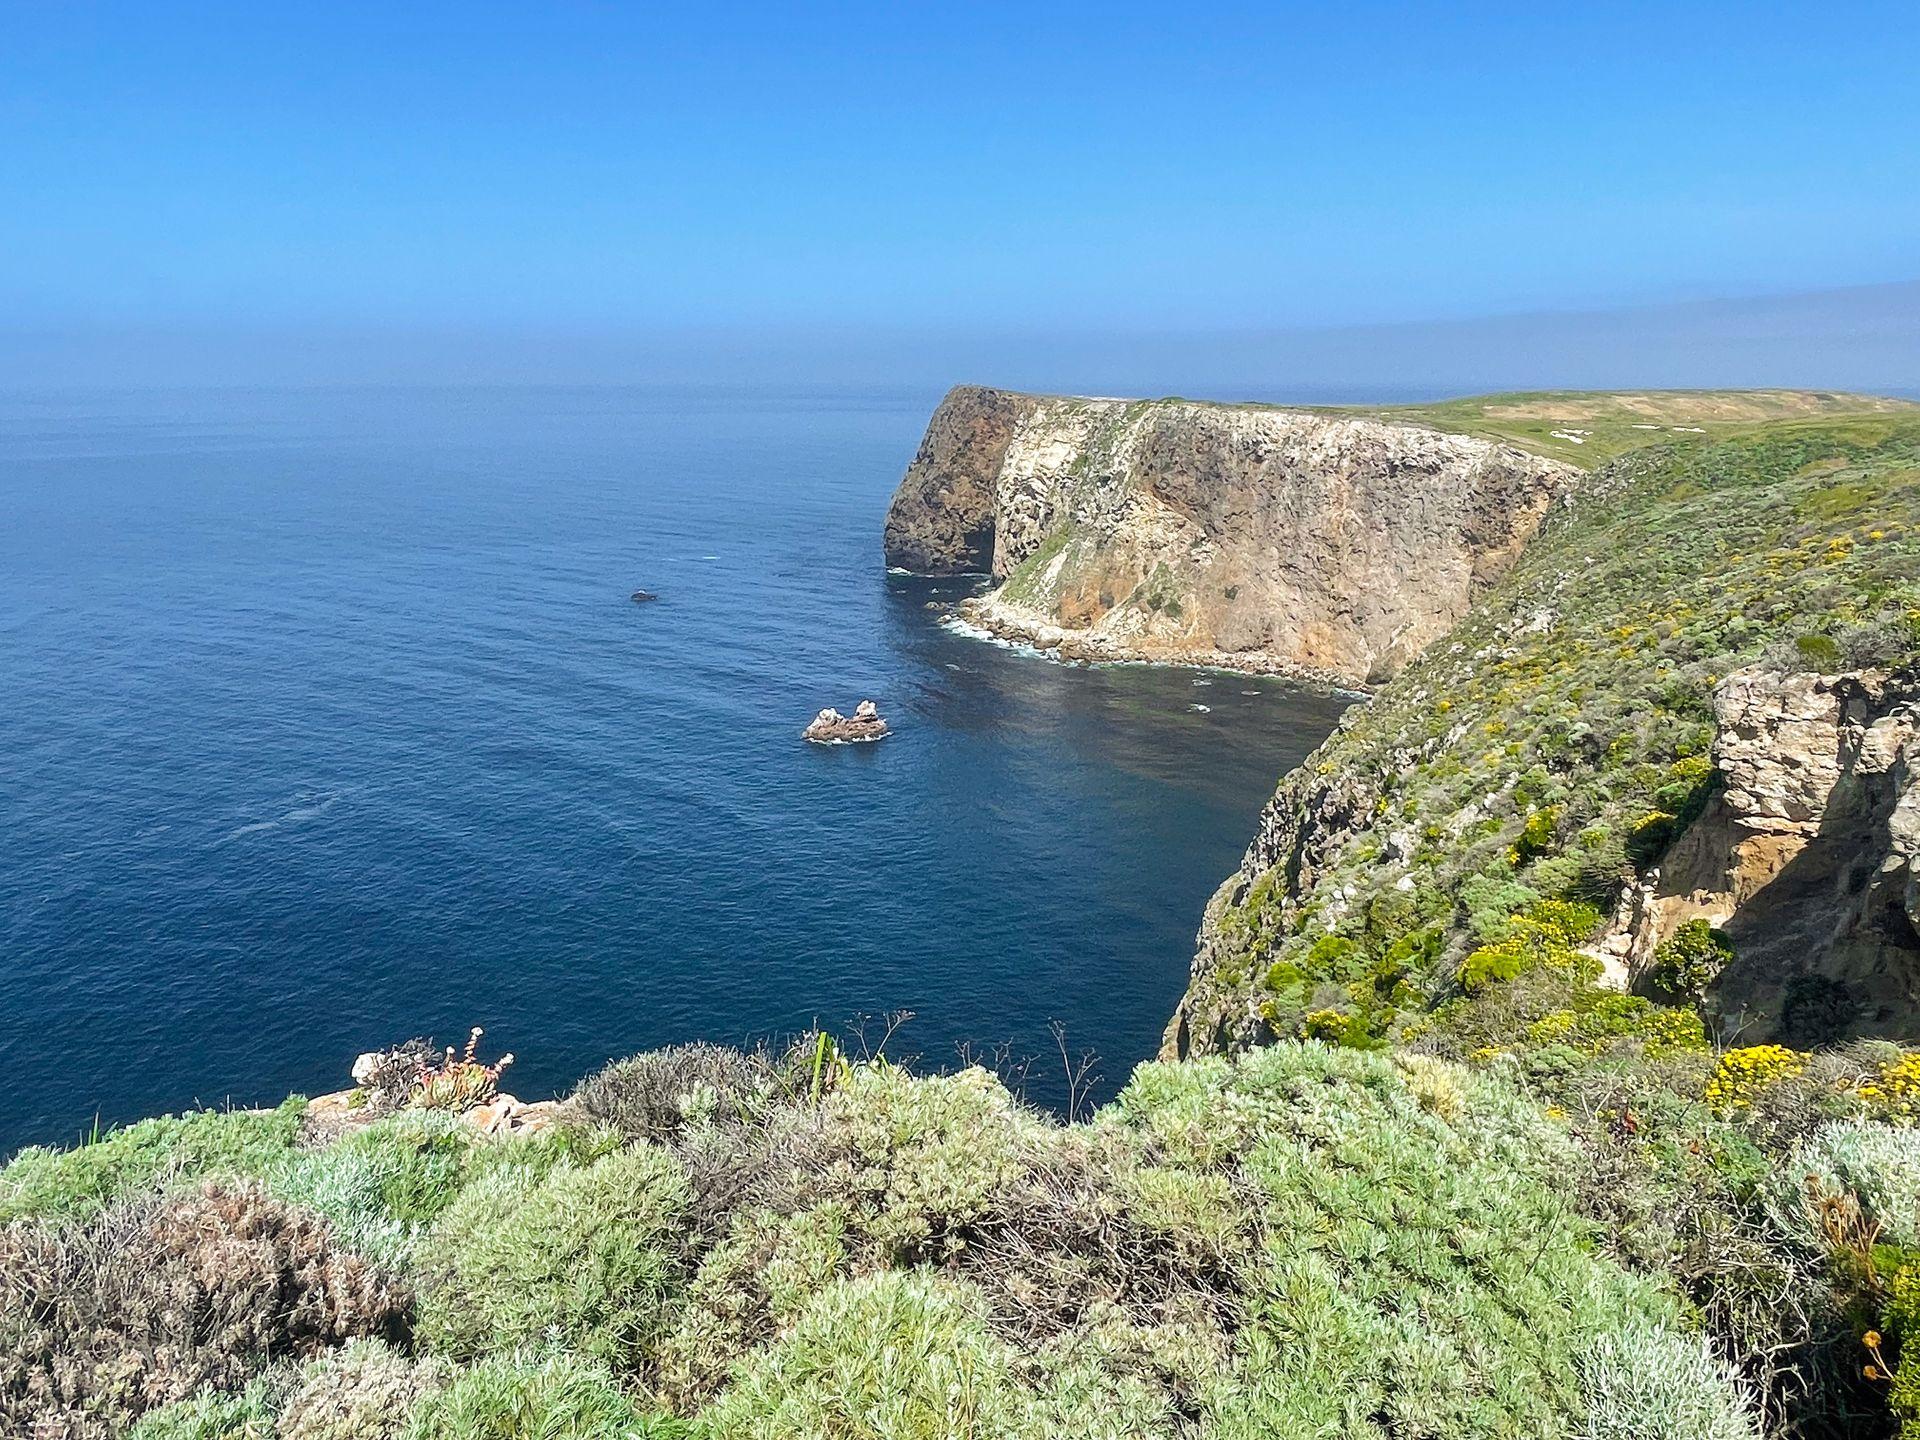 A view of the ocean and a cliff seen from hiking on Santa Cruz Island